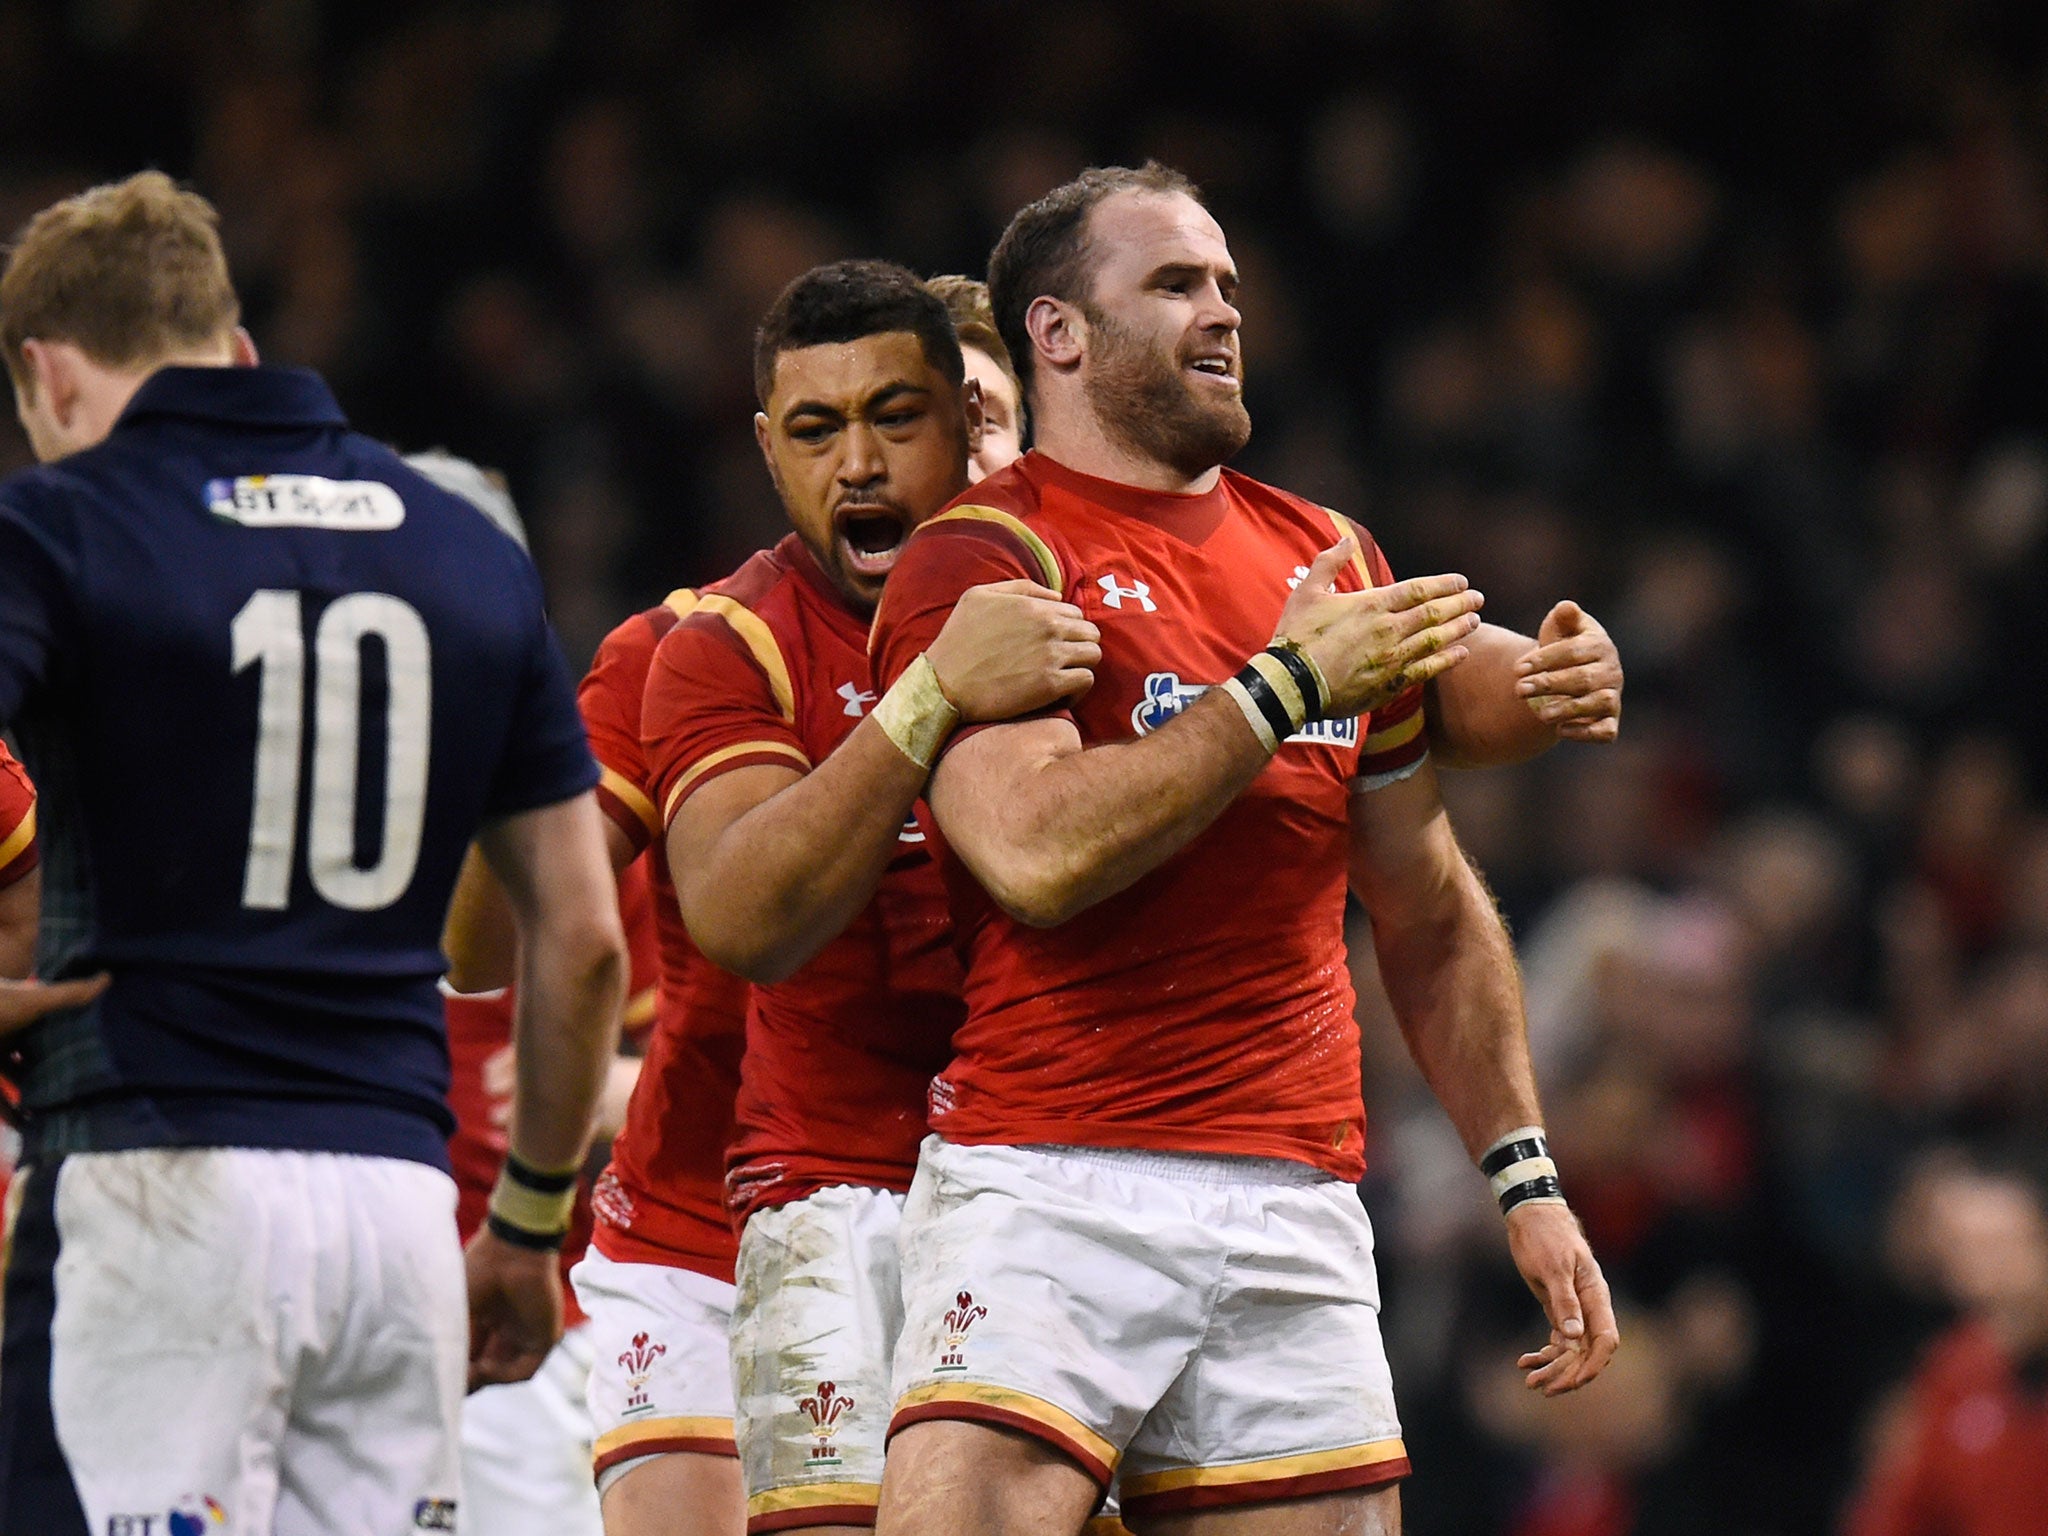 Jamie Roberts was named man of the match in Wales' 27-23 win over Scotland.